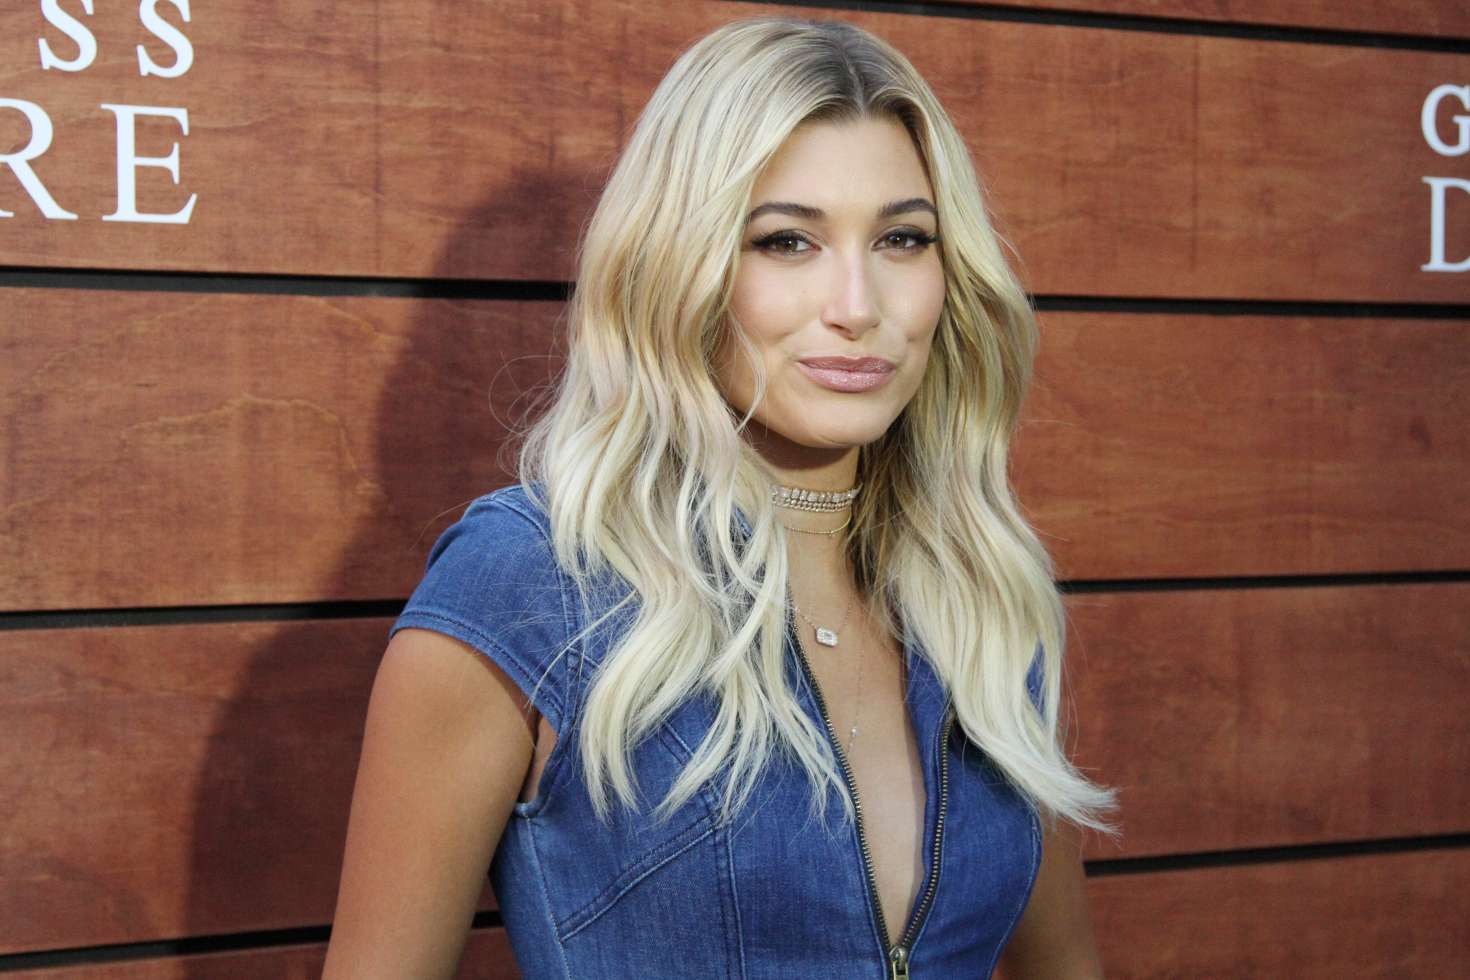 Hailey Baldwin Wallpaper Image Photo Picture Background